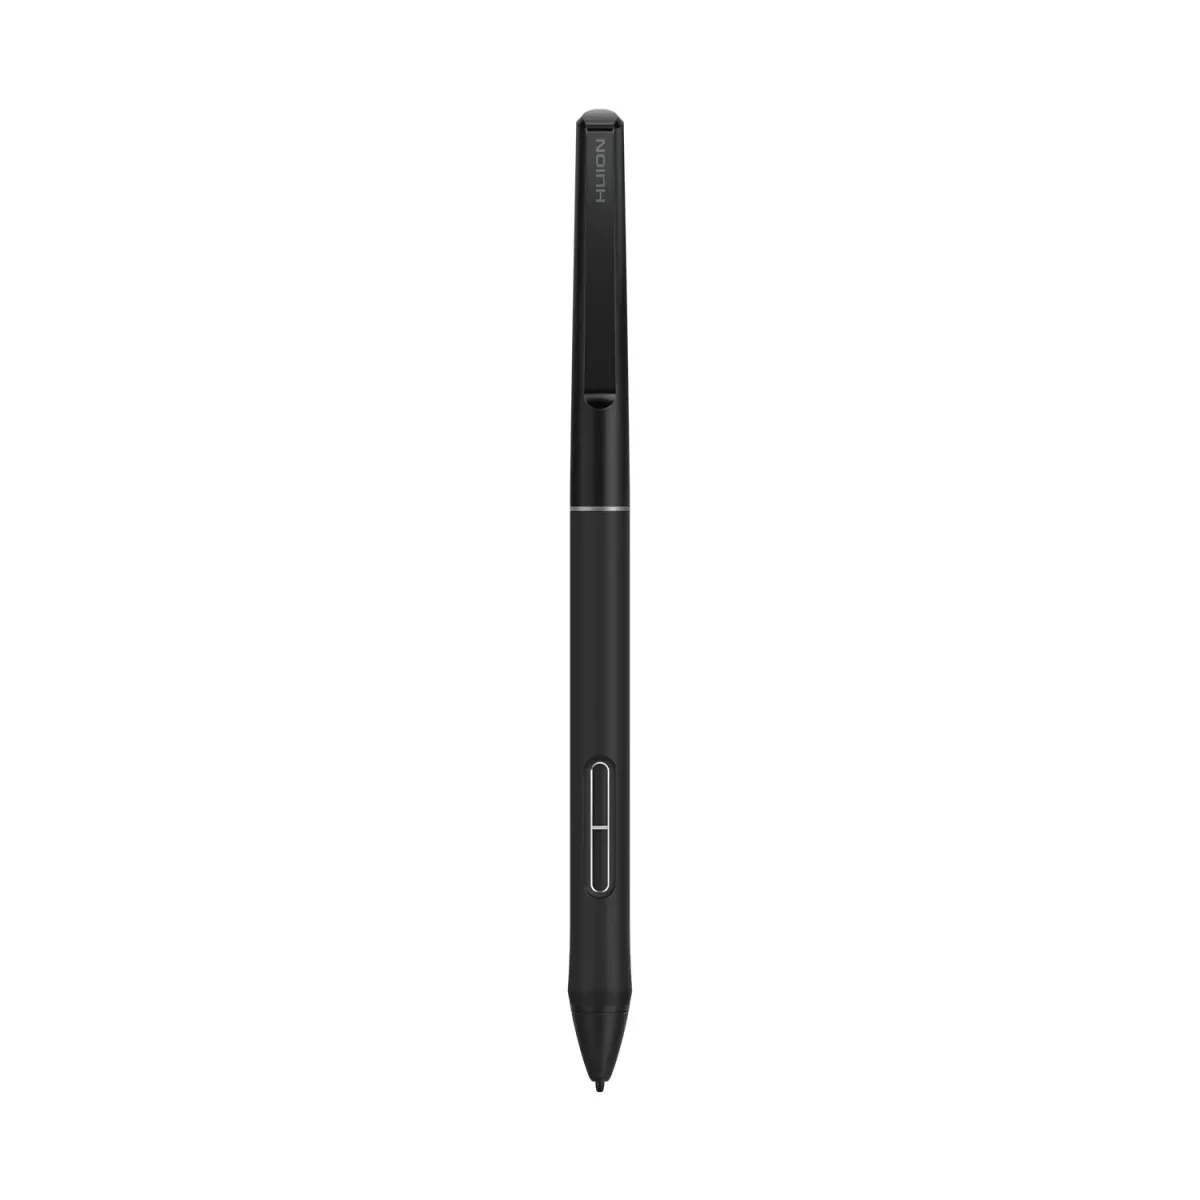 Kamvas 16 (2021) graphic pen display for beginners  Huion Official Store:  Drawing Tablets, Pen Tablets, Pen Display, Led Light Pad